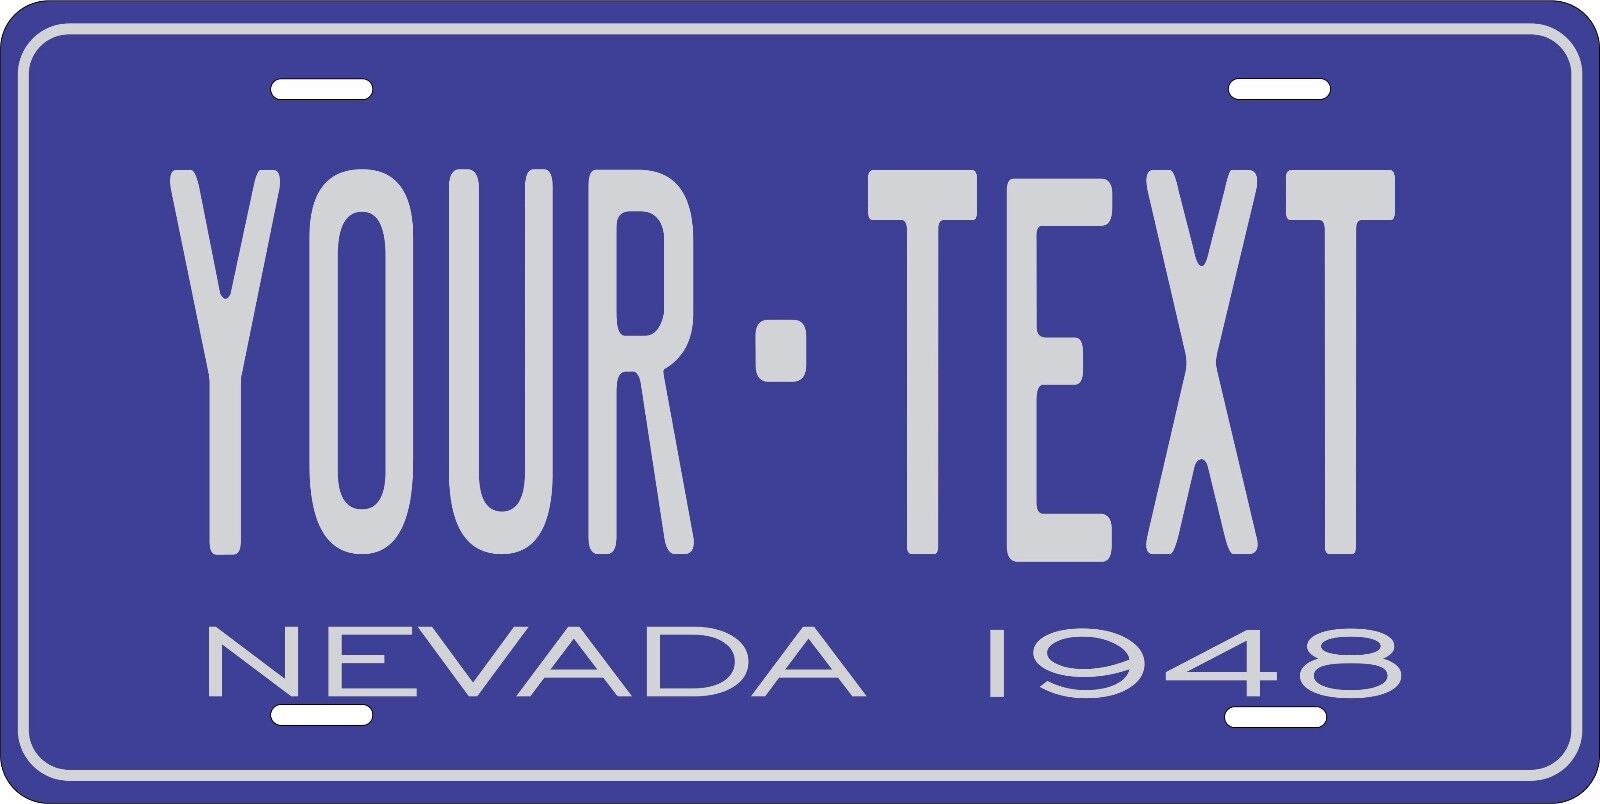 Nevada 1948 License Plate Personalized Custom Auto Bike Motorcycle Moped key tag